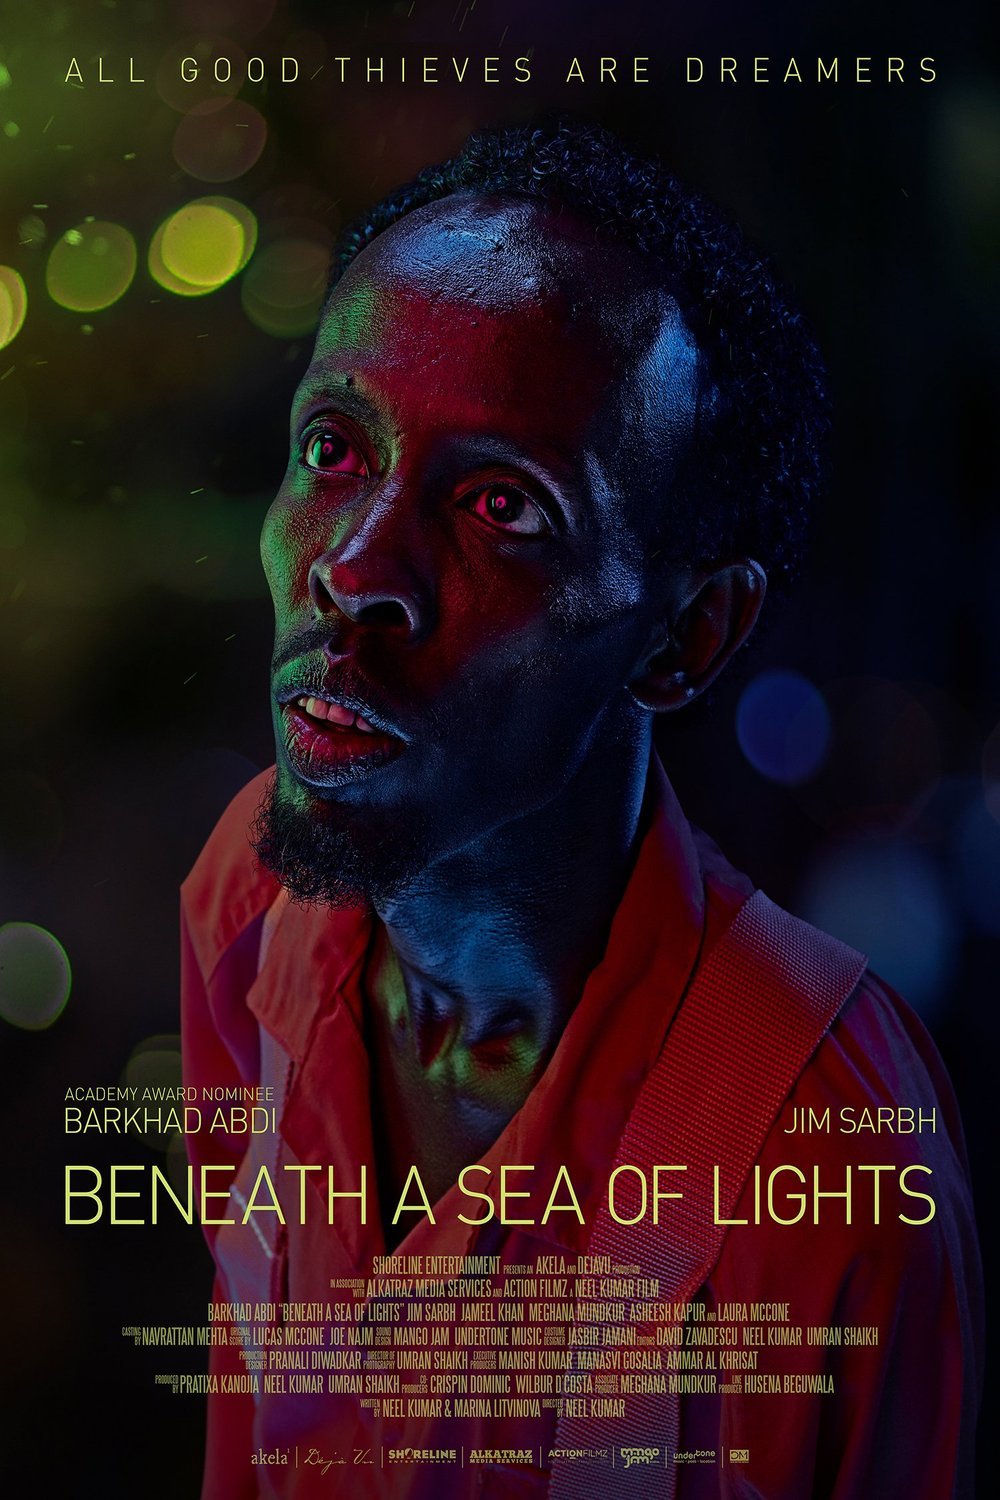 Hindi poster of the movie Beneath a Sea of Lights